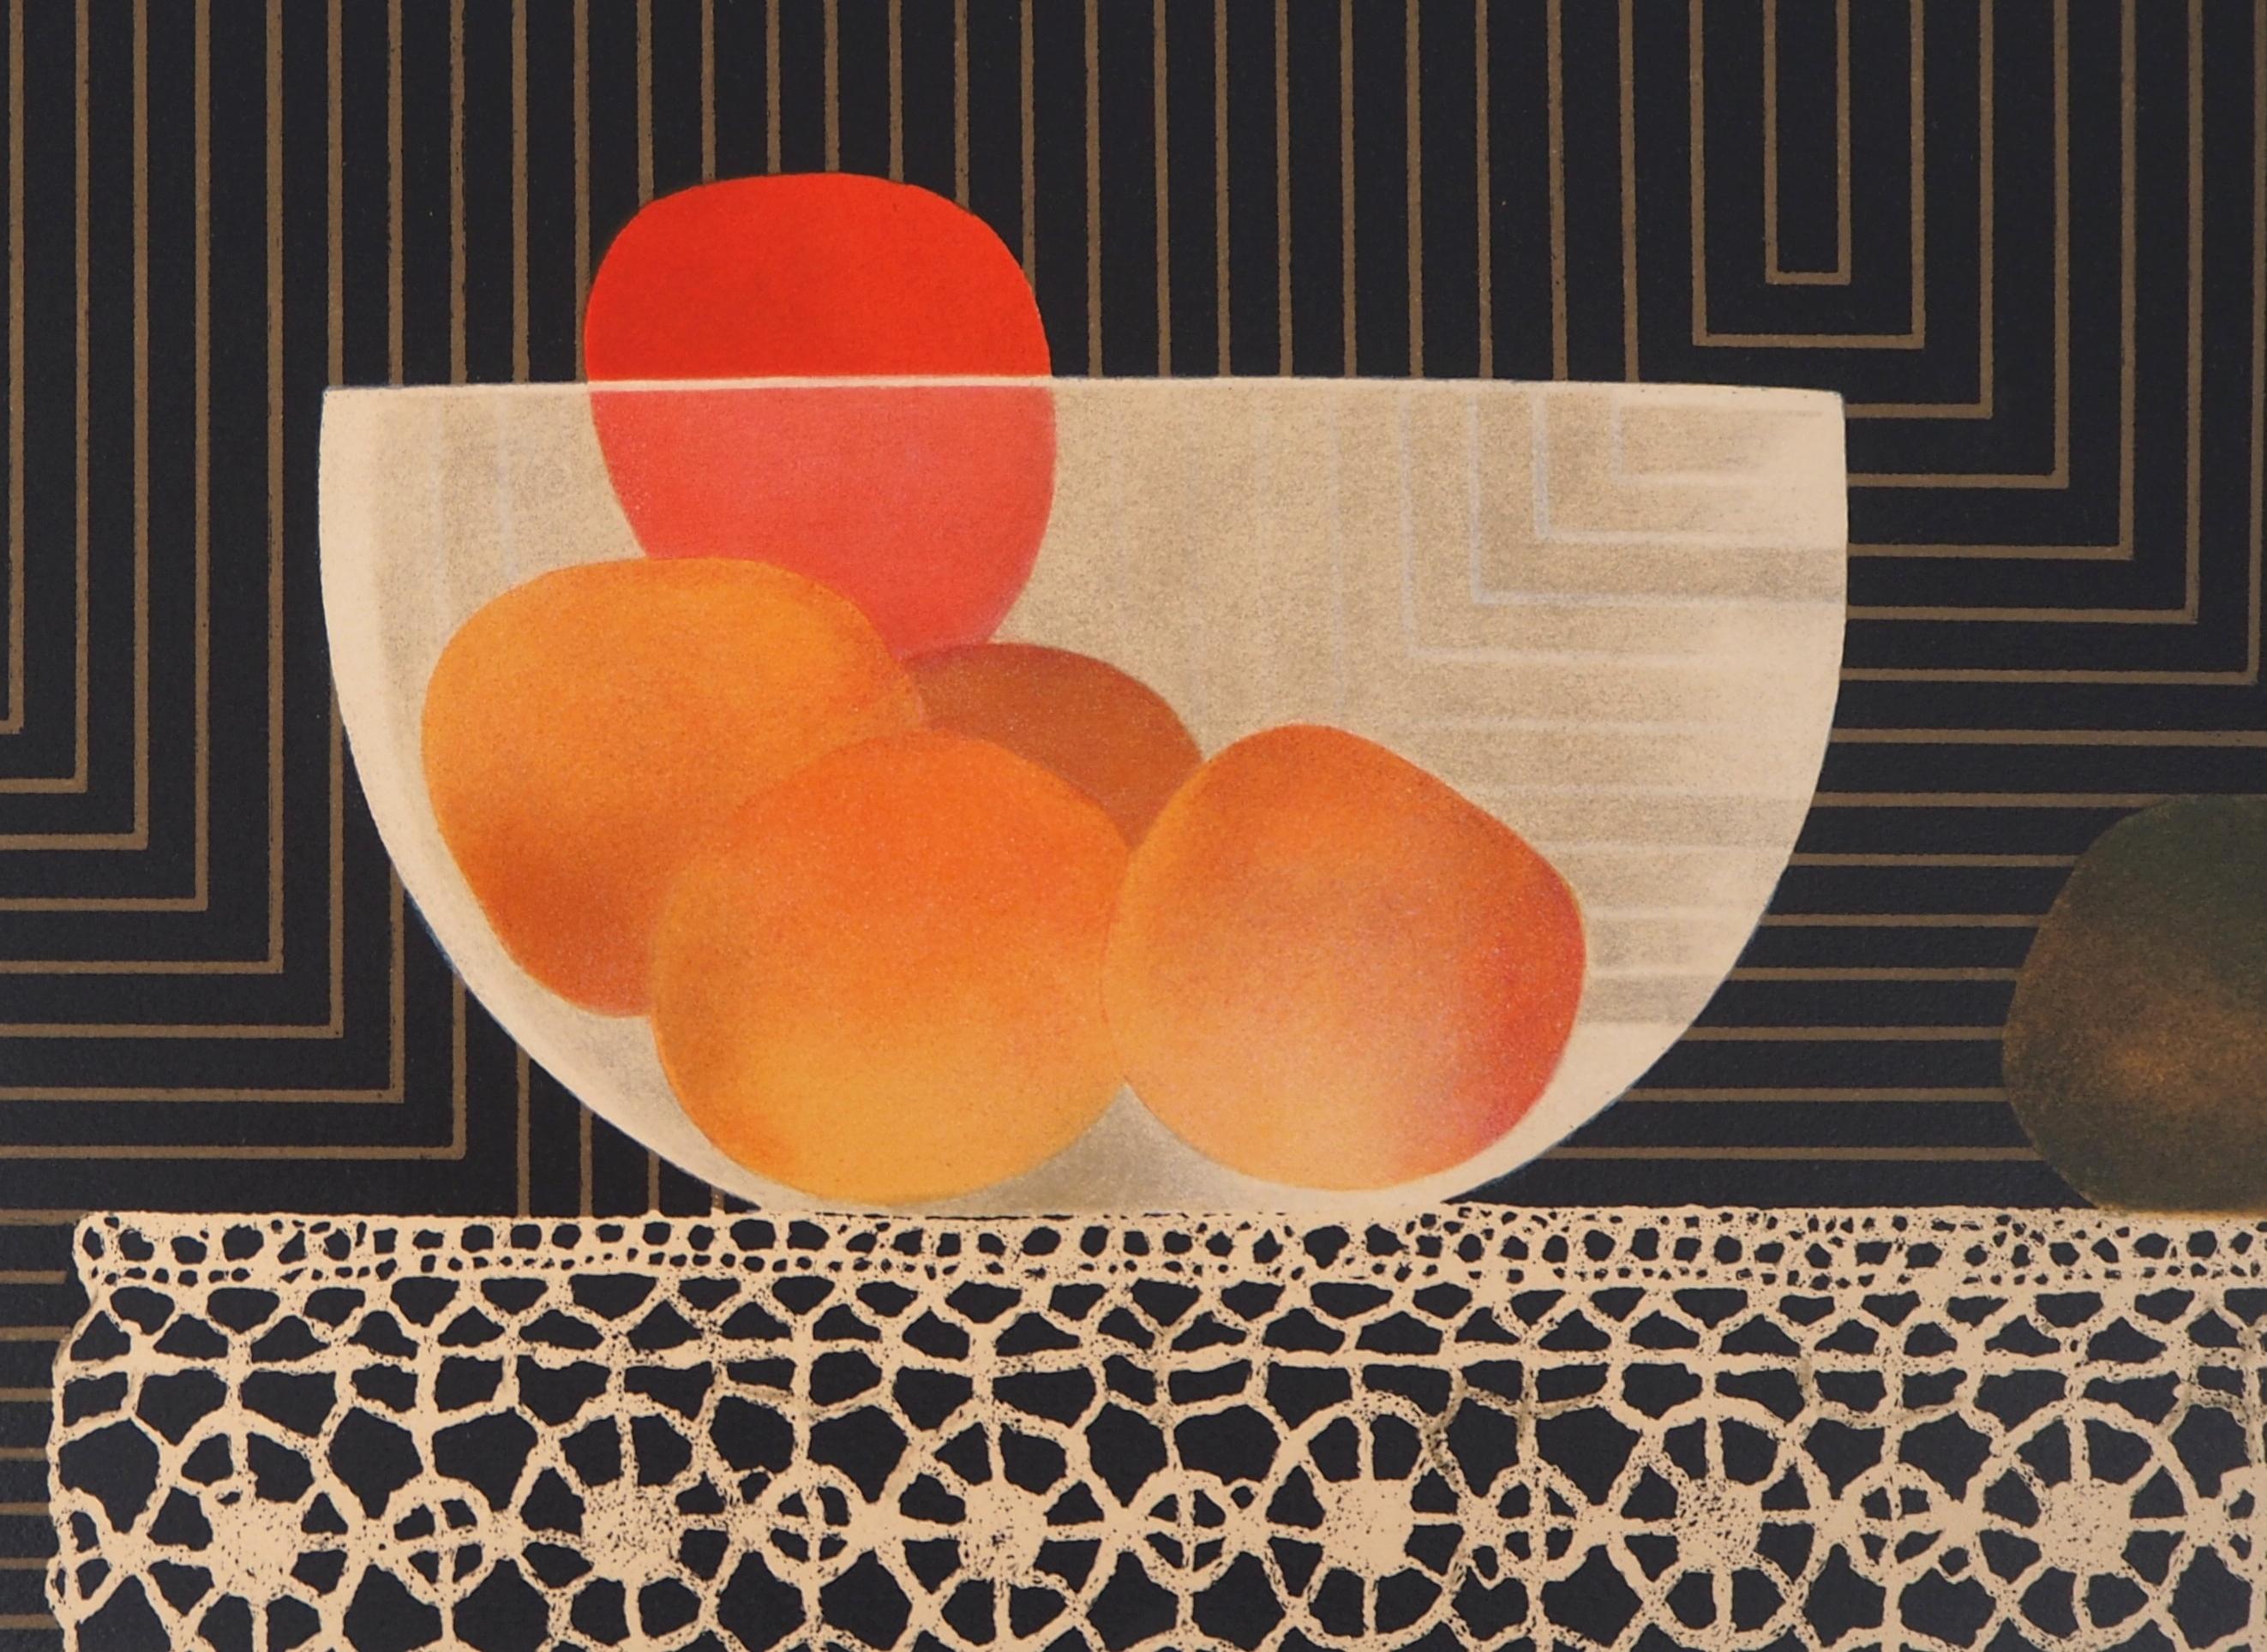 Still Life with Apples - Original lithograph, Signed - Modern Print by Pierre Garcia Fons